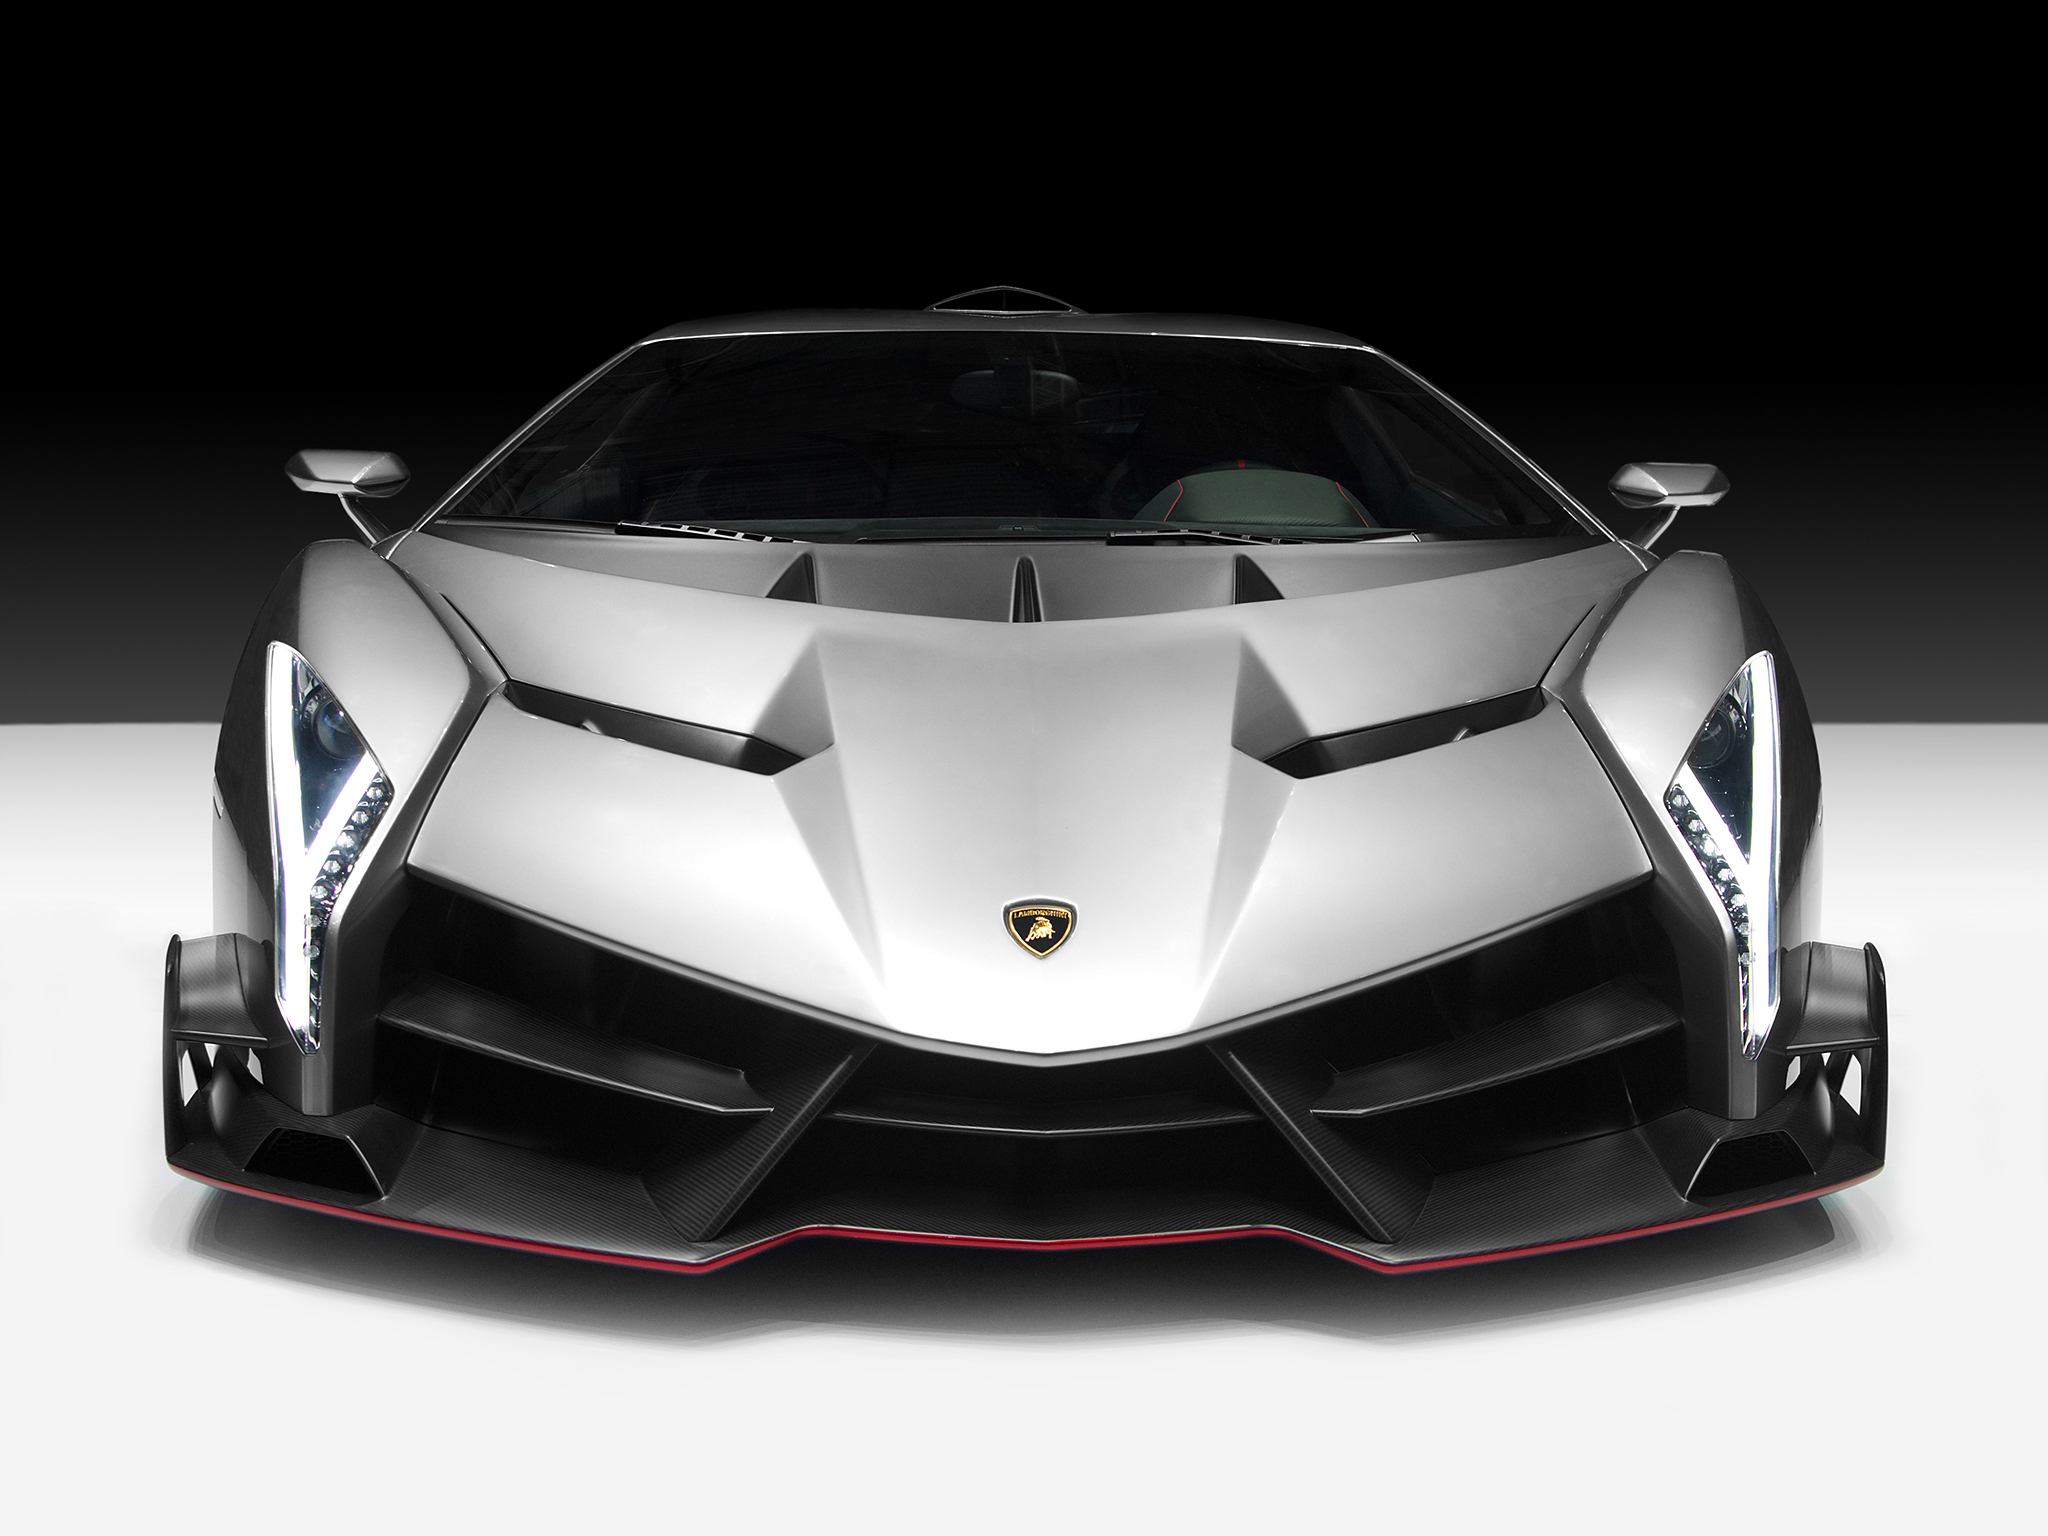 This car, like other Lamborghini models, was given a name chosen to commemorate a famous “corrida” fighting bull. Veneno, in Spanish, means "poison"